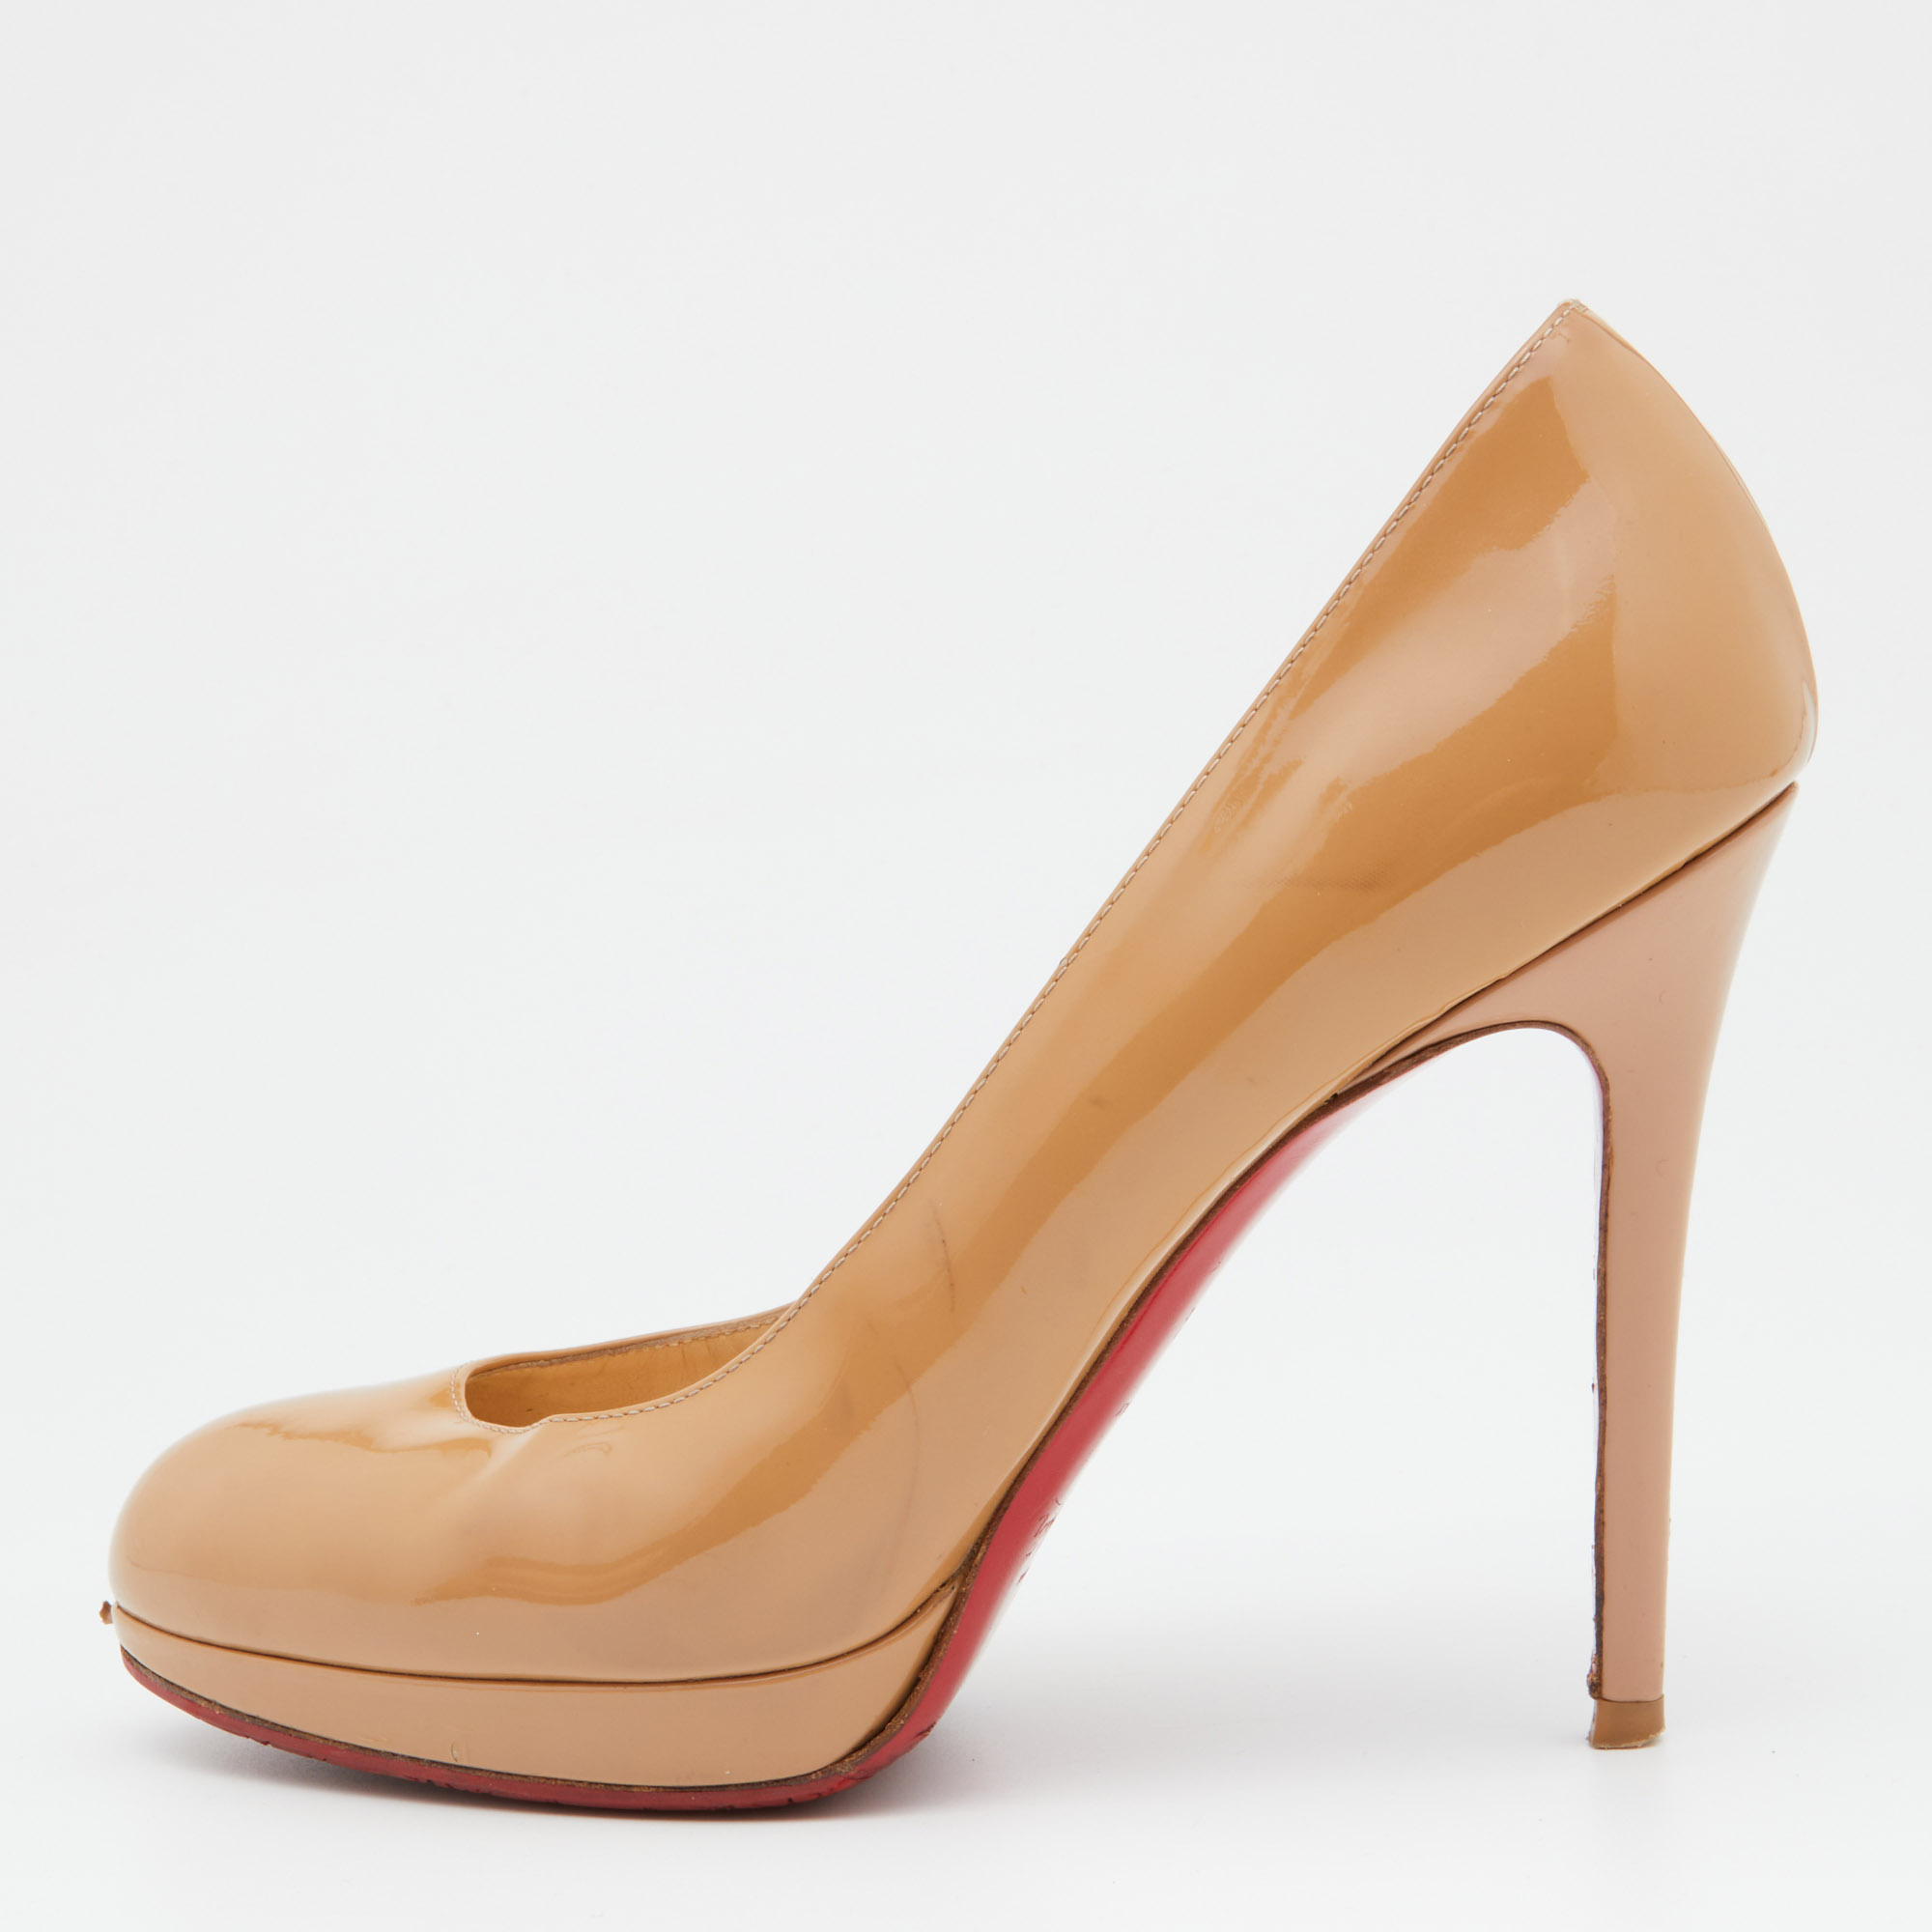 Christian louboutin beige patent leather new simple pumps size 38.5